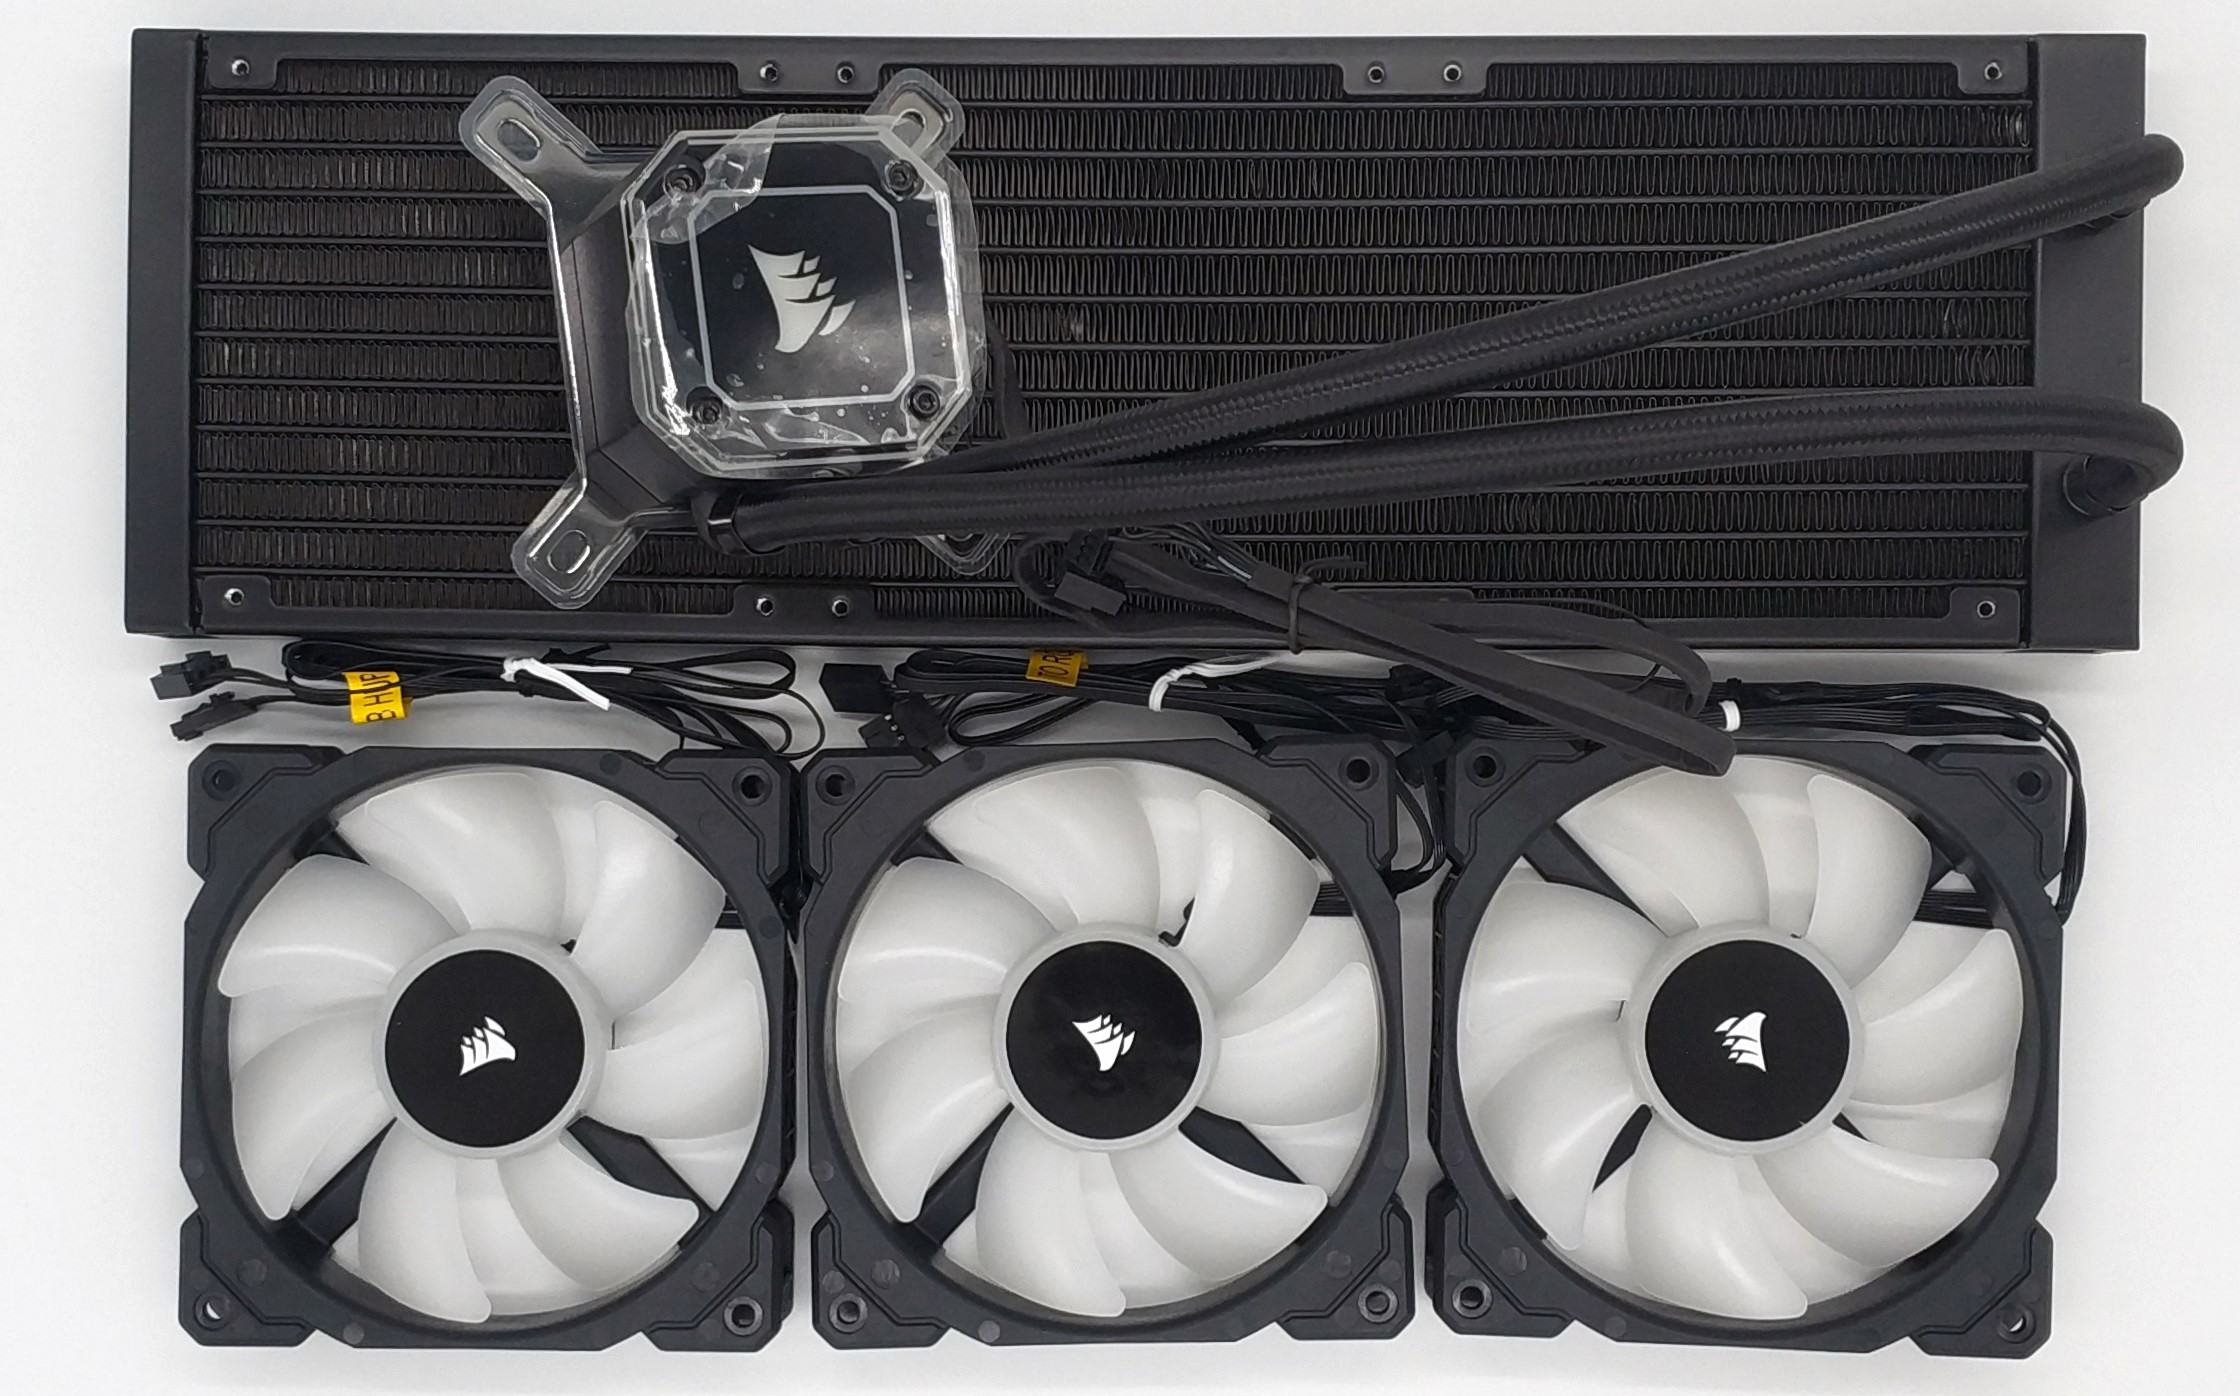 Corsair H150i ELITE CAPELLIX review - Powerful cooling with Next-Gen